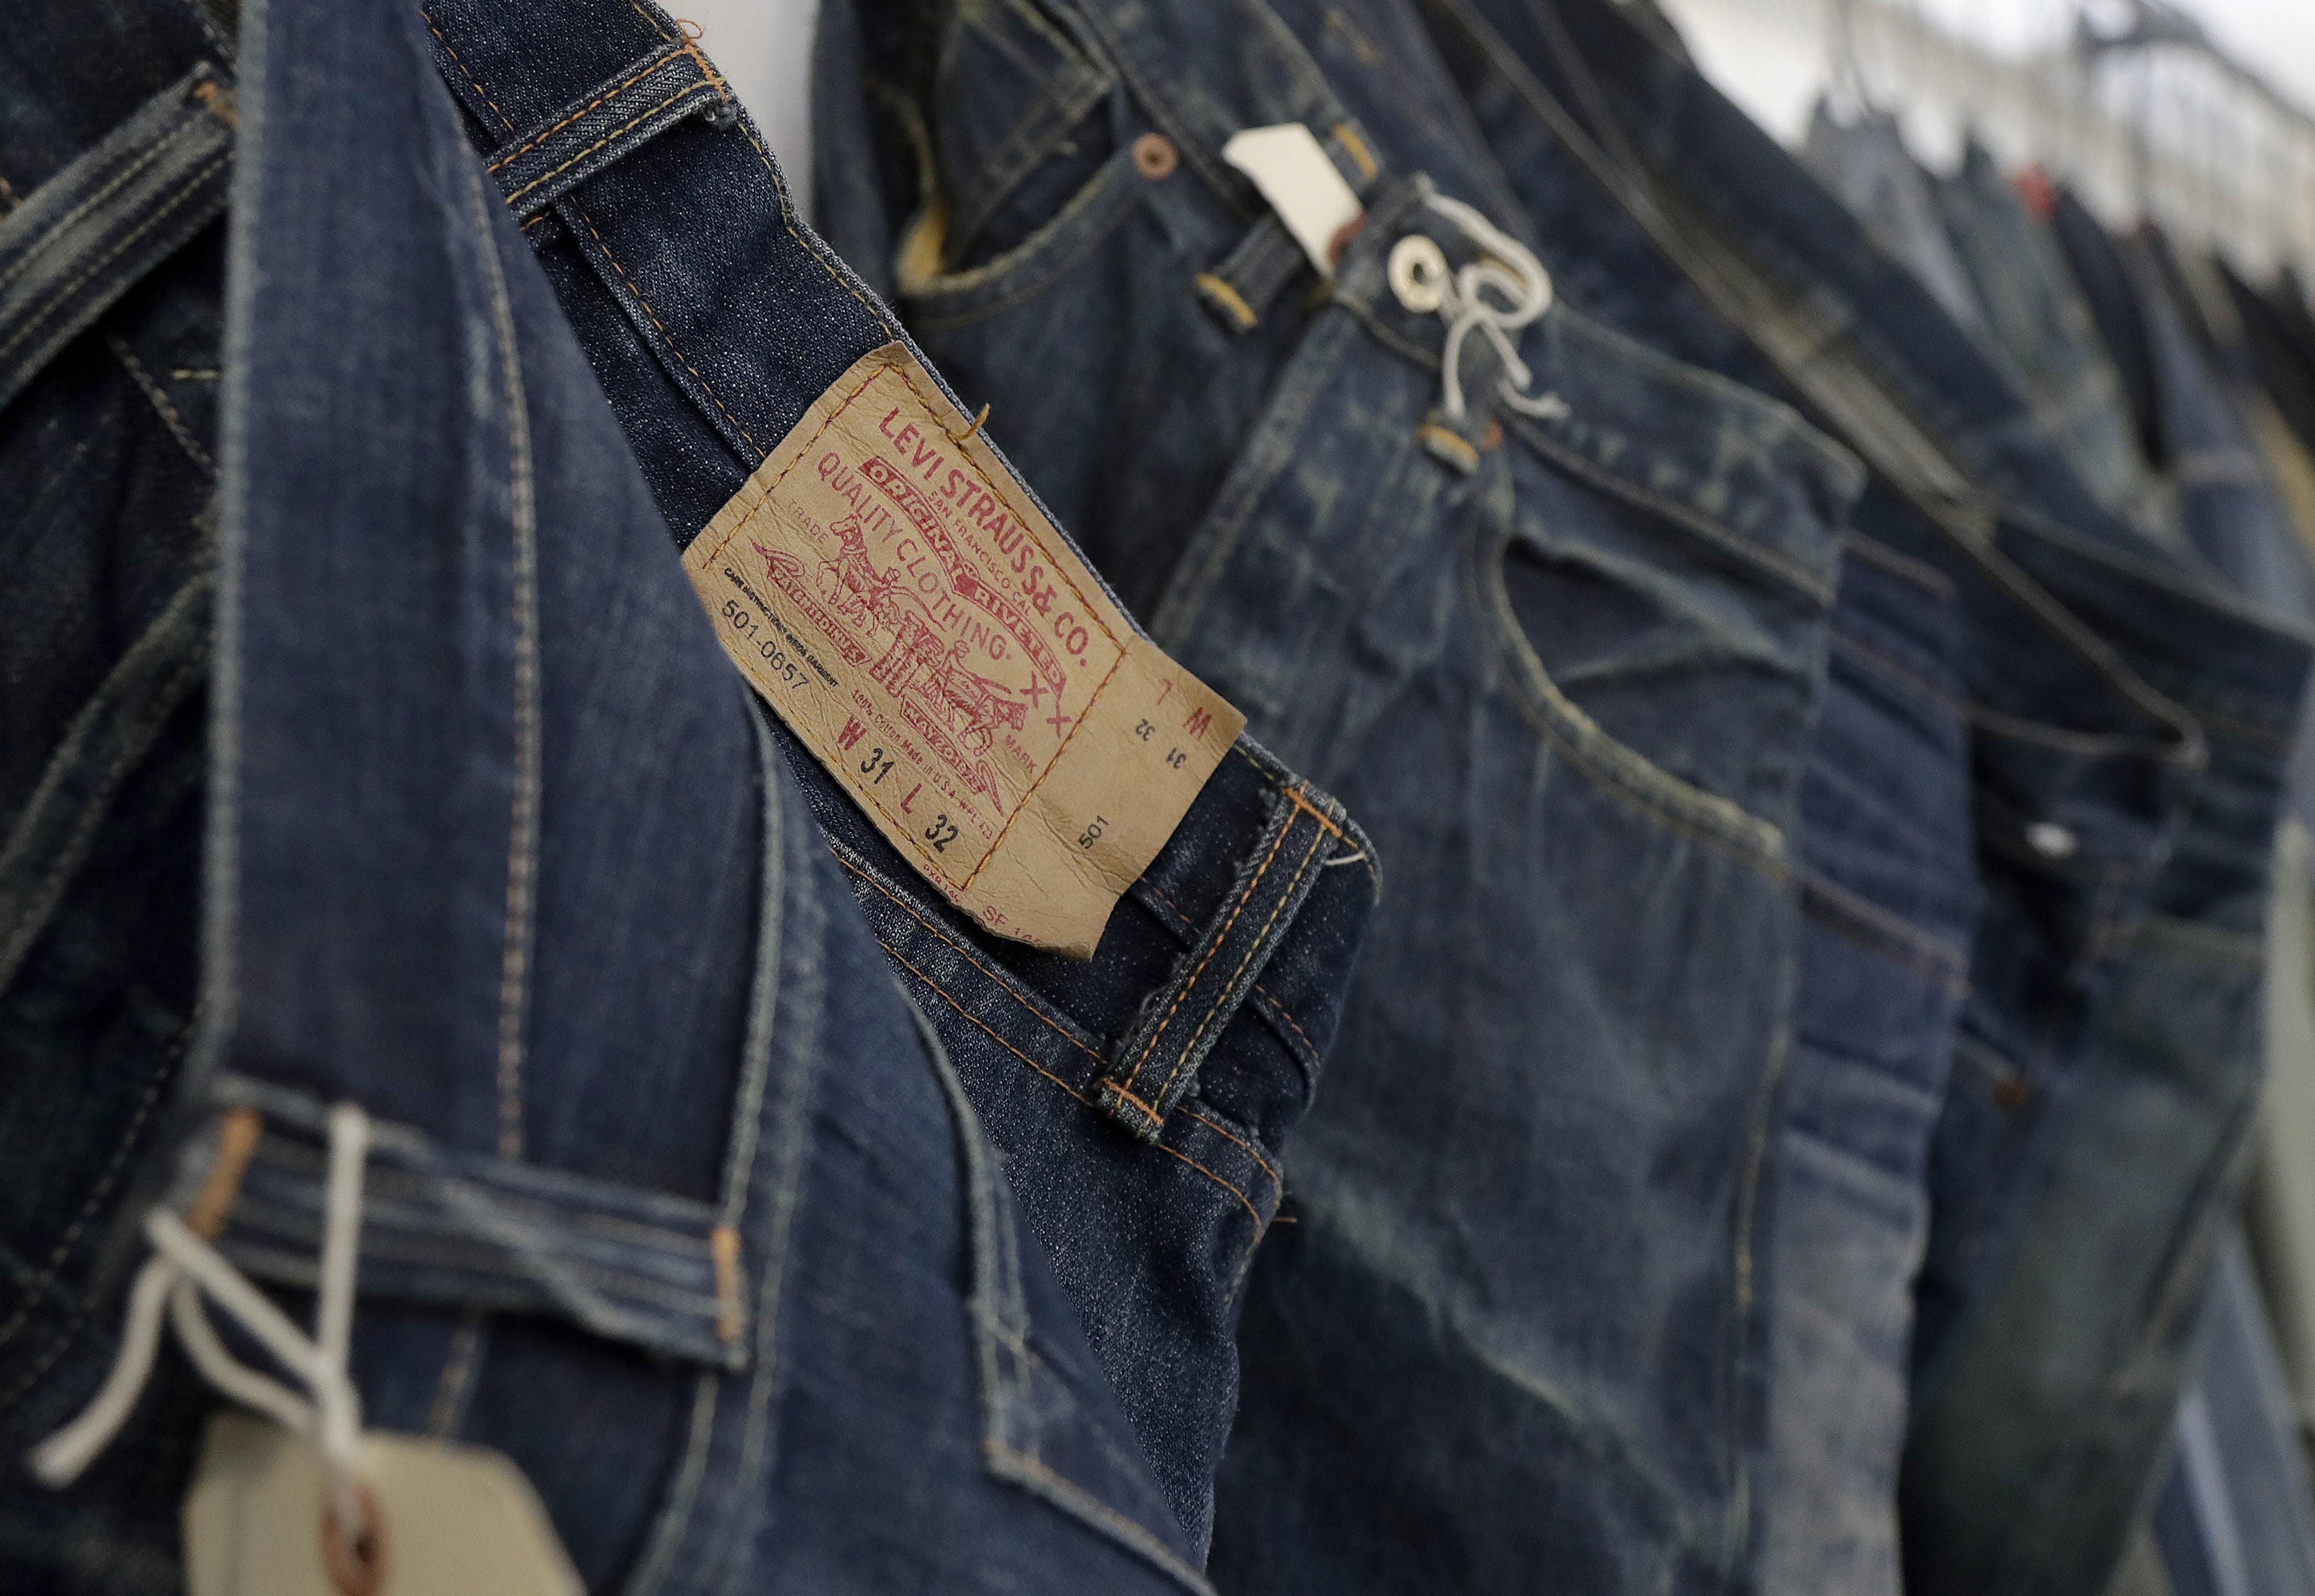 Levi Strauss files for IPO as jeans 